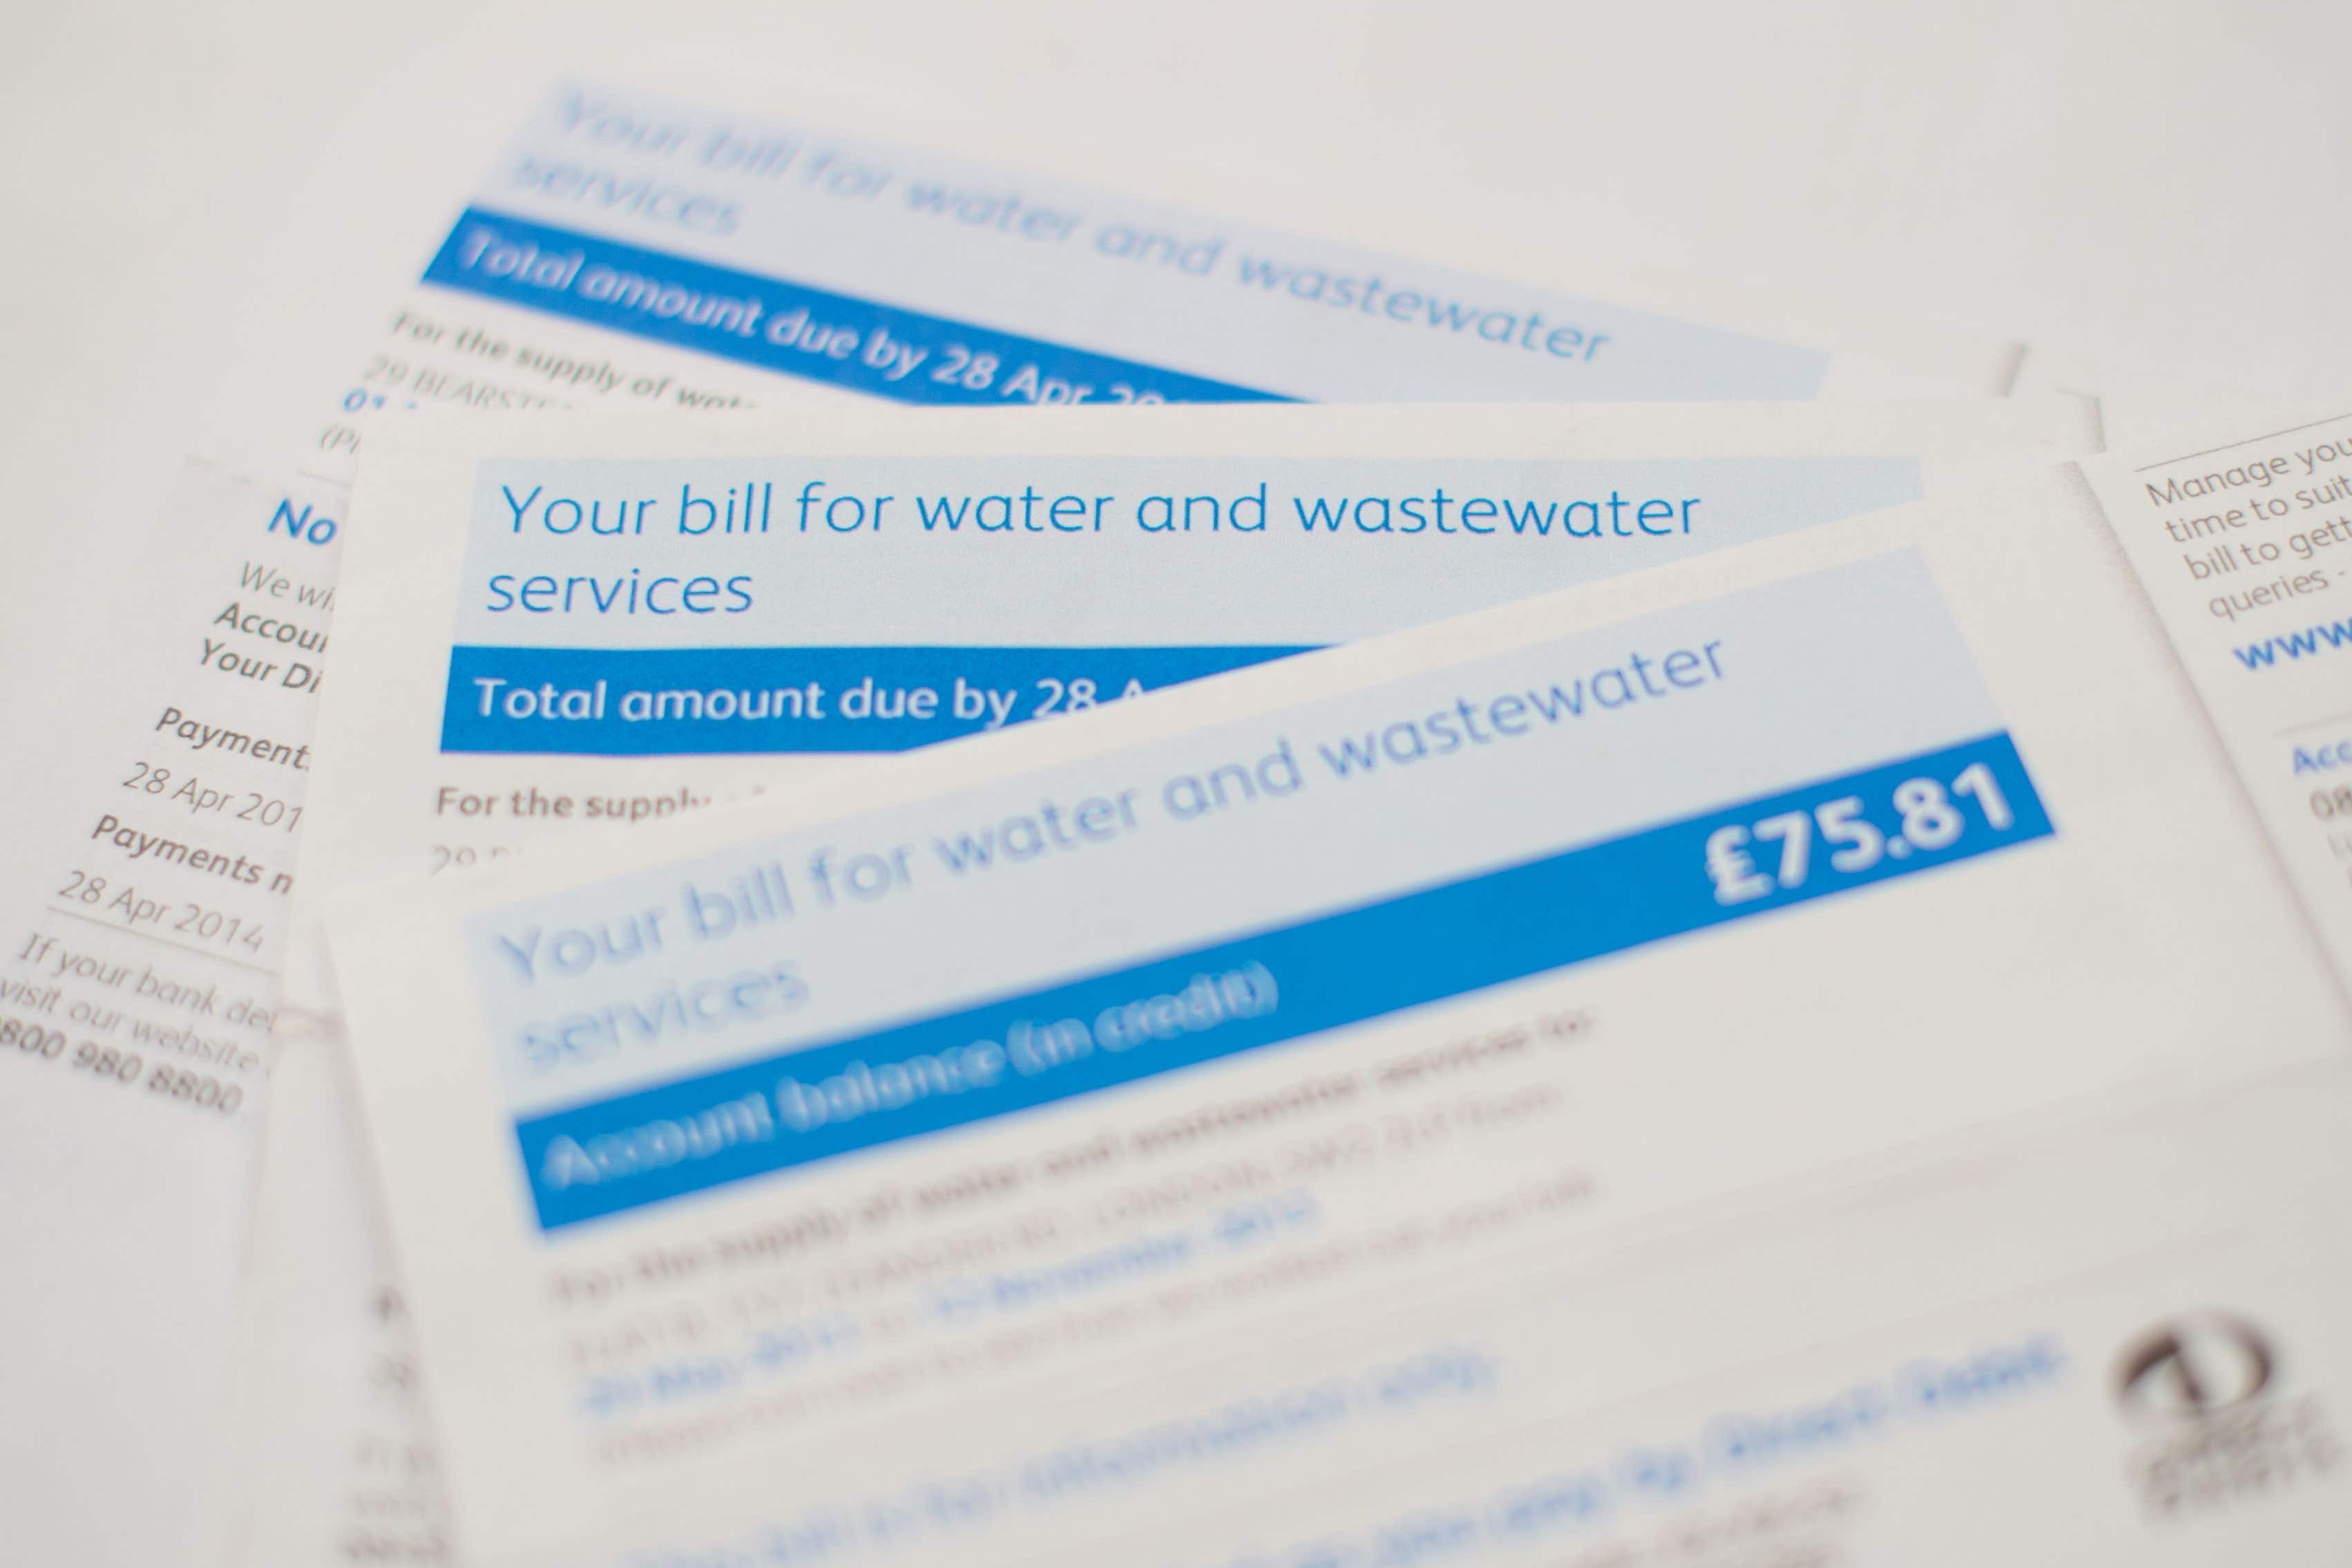 Consumers will have to repay the £10bn investment through bills